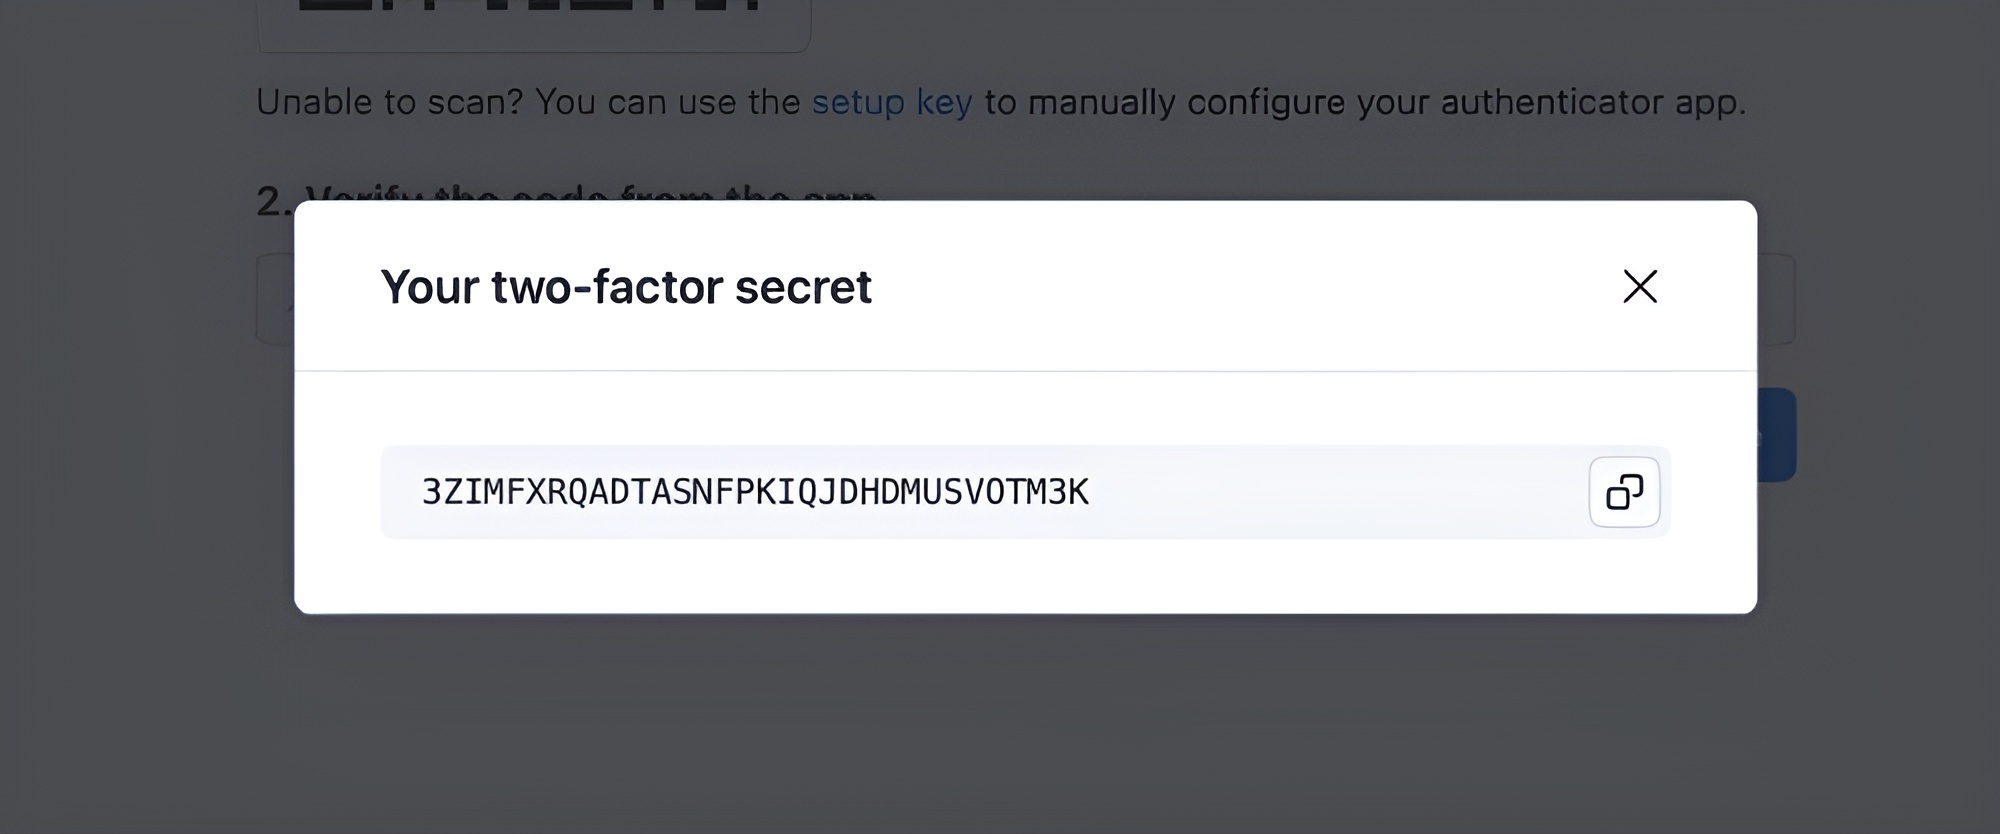 Apify Console setup two-factor authentication - key